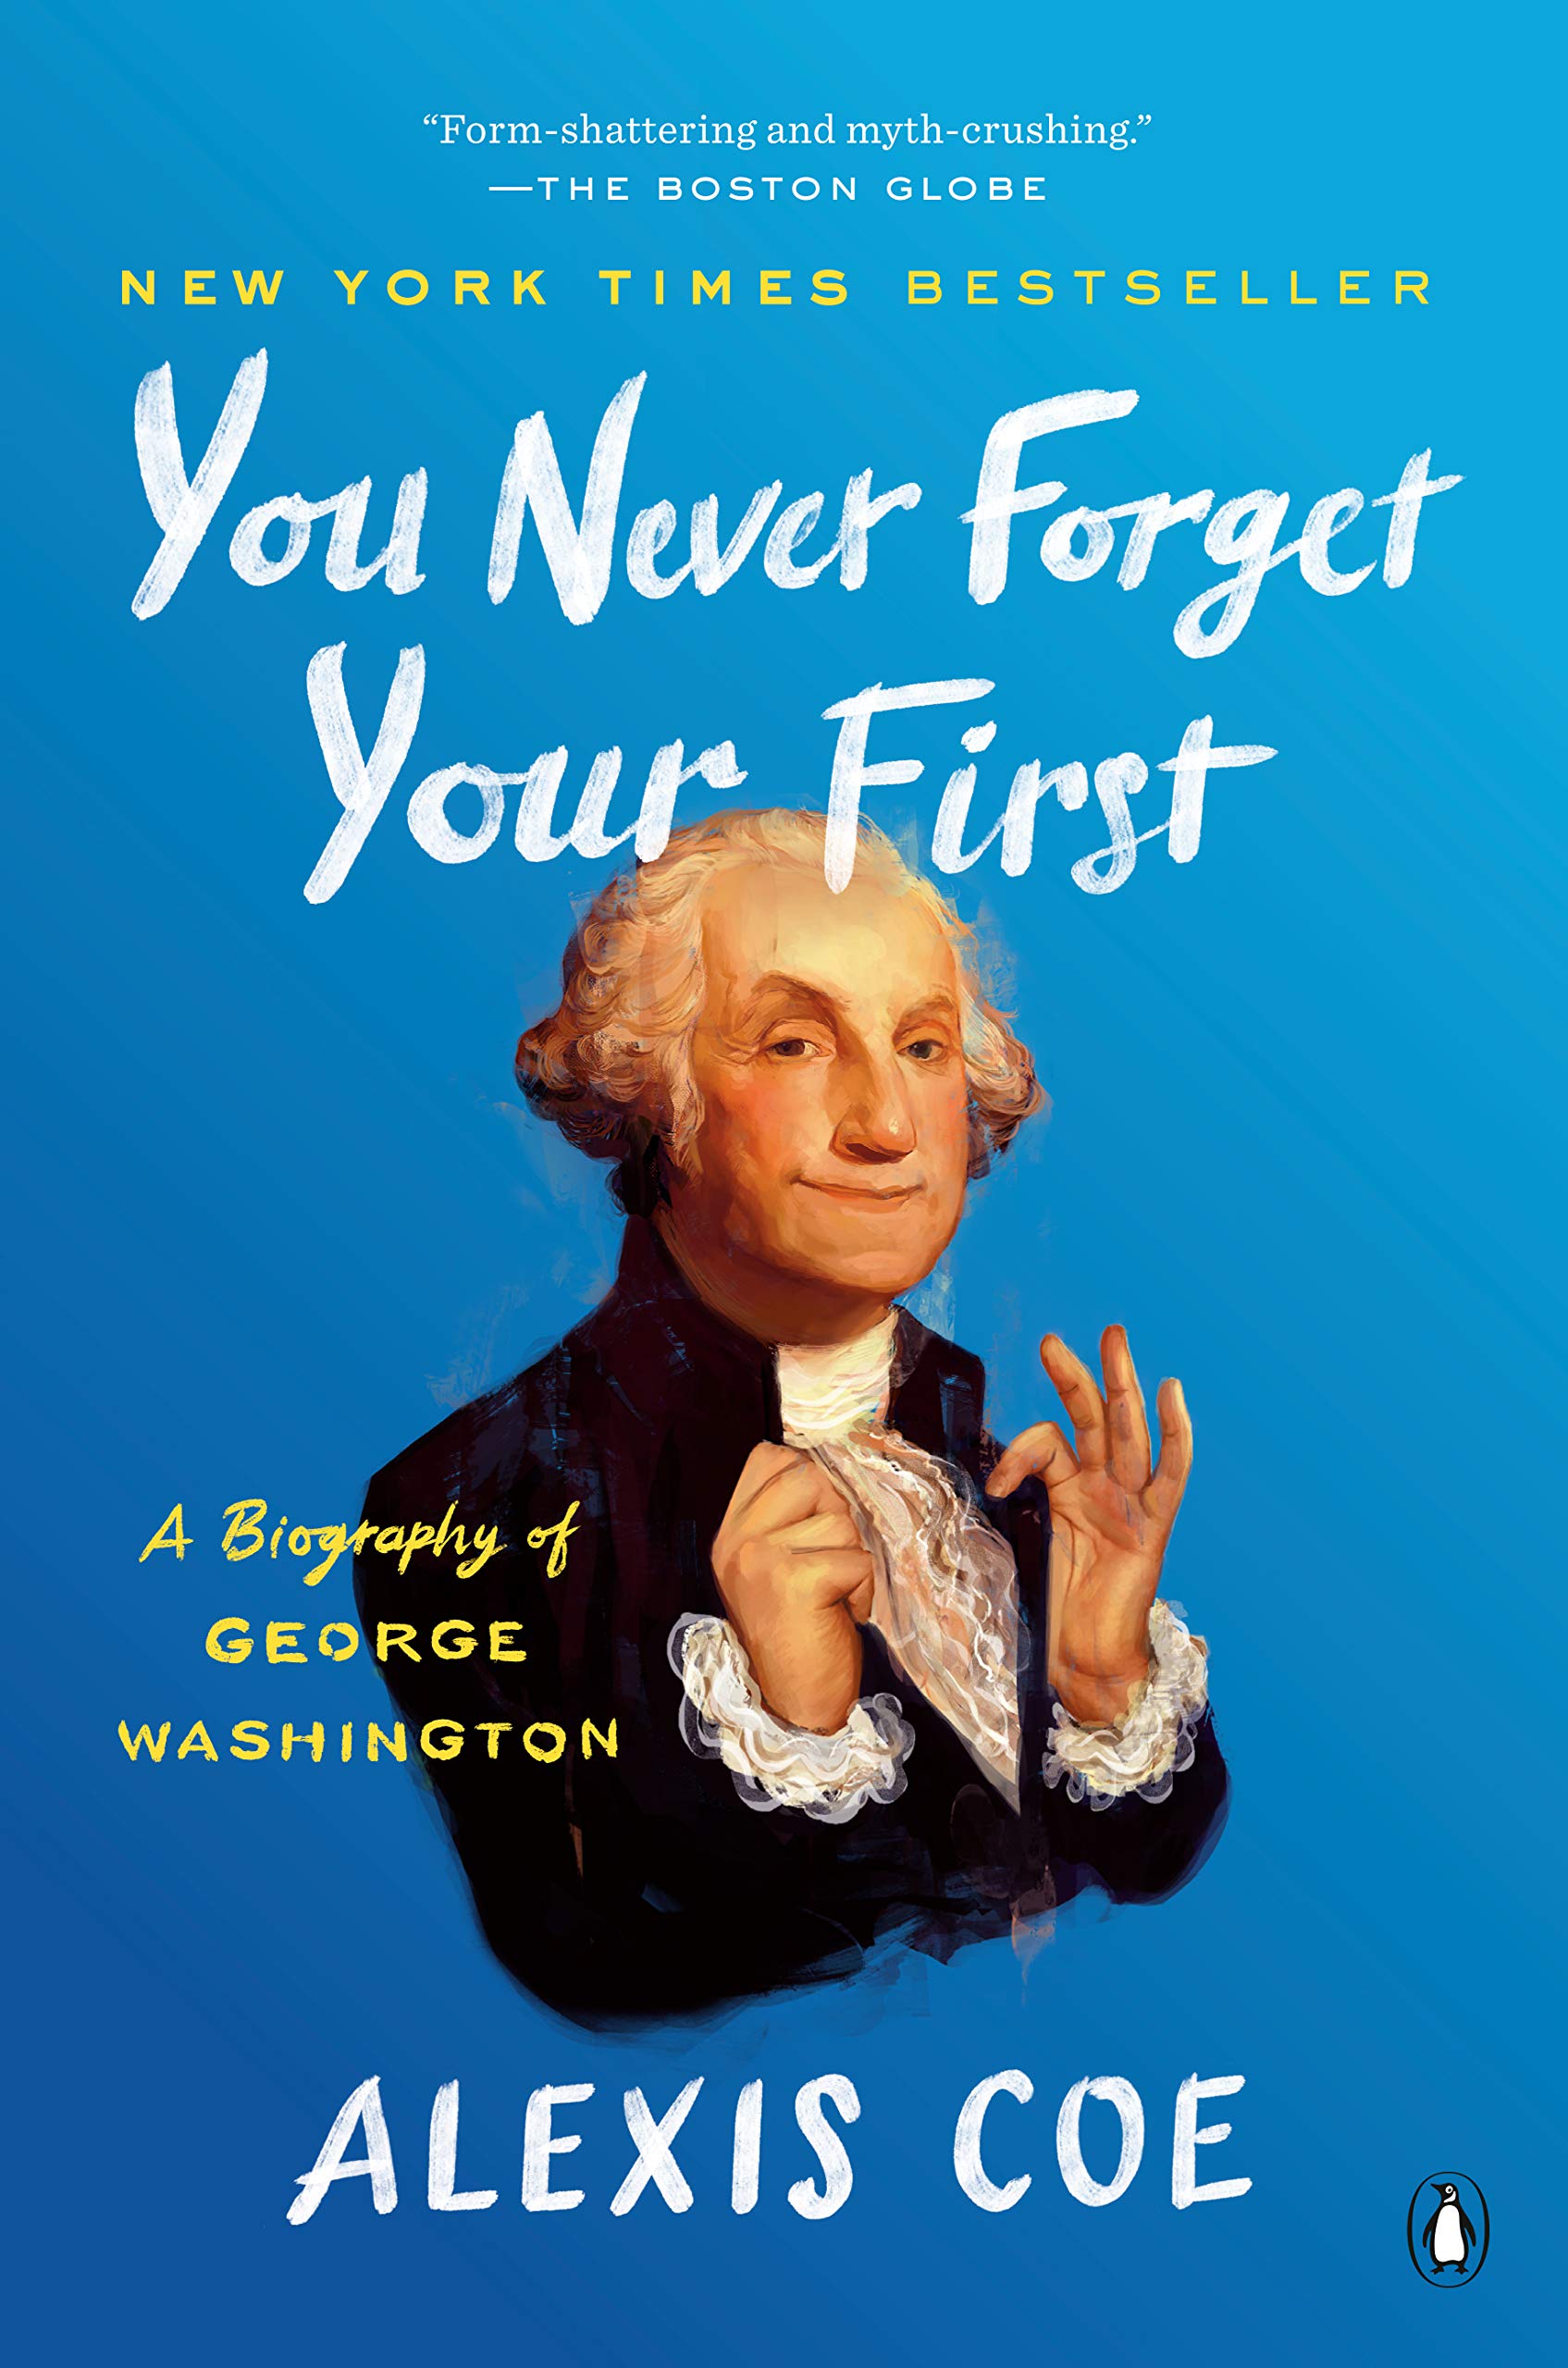 Image for "You Never Forget Your First"